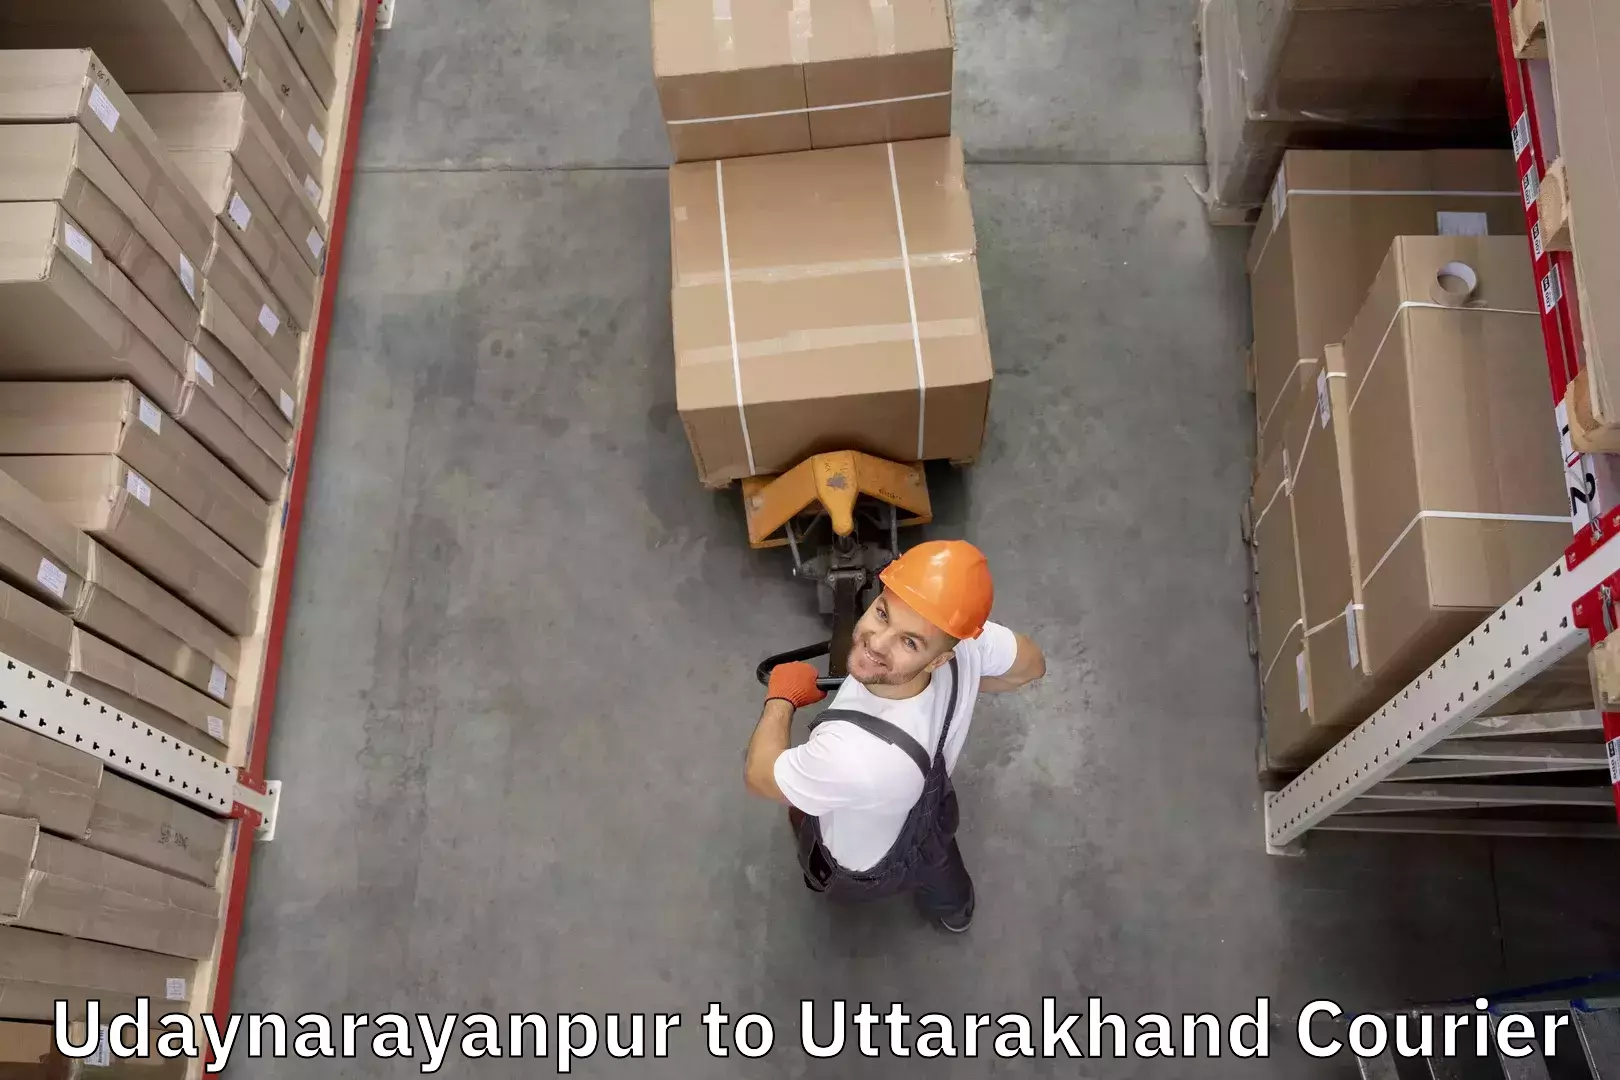 Baggage transport services Udaynarayanpur to Mussoorie